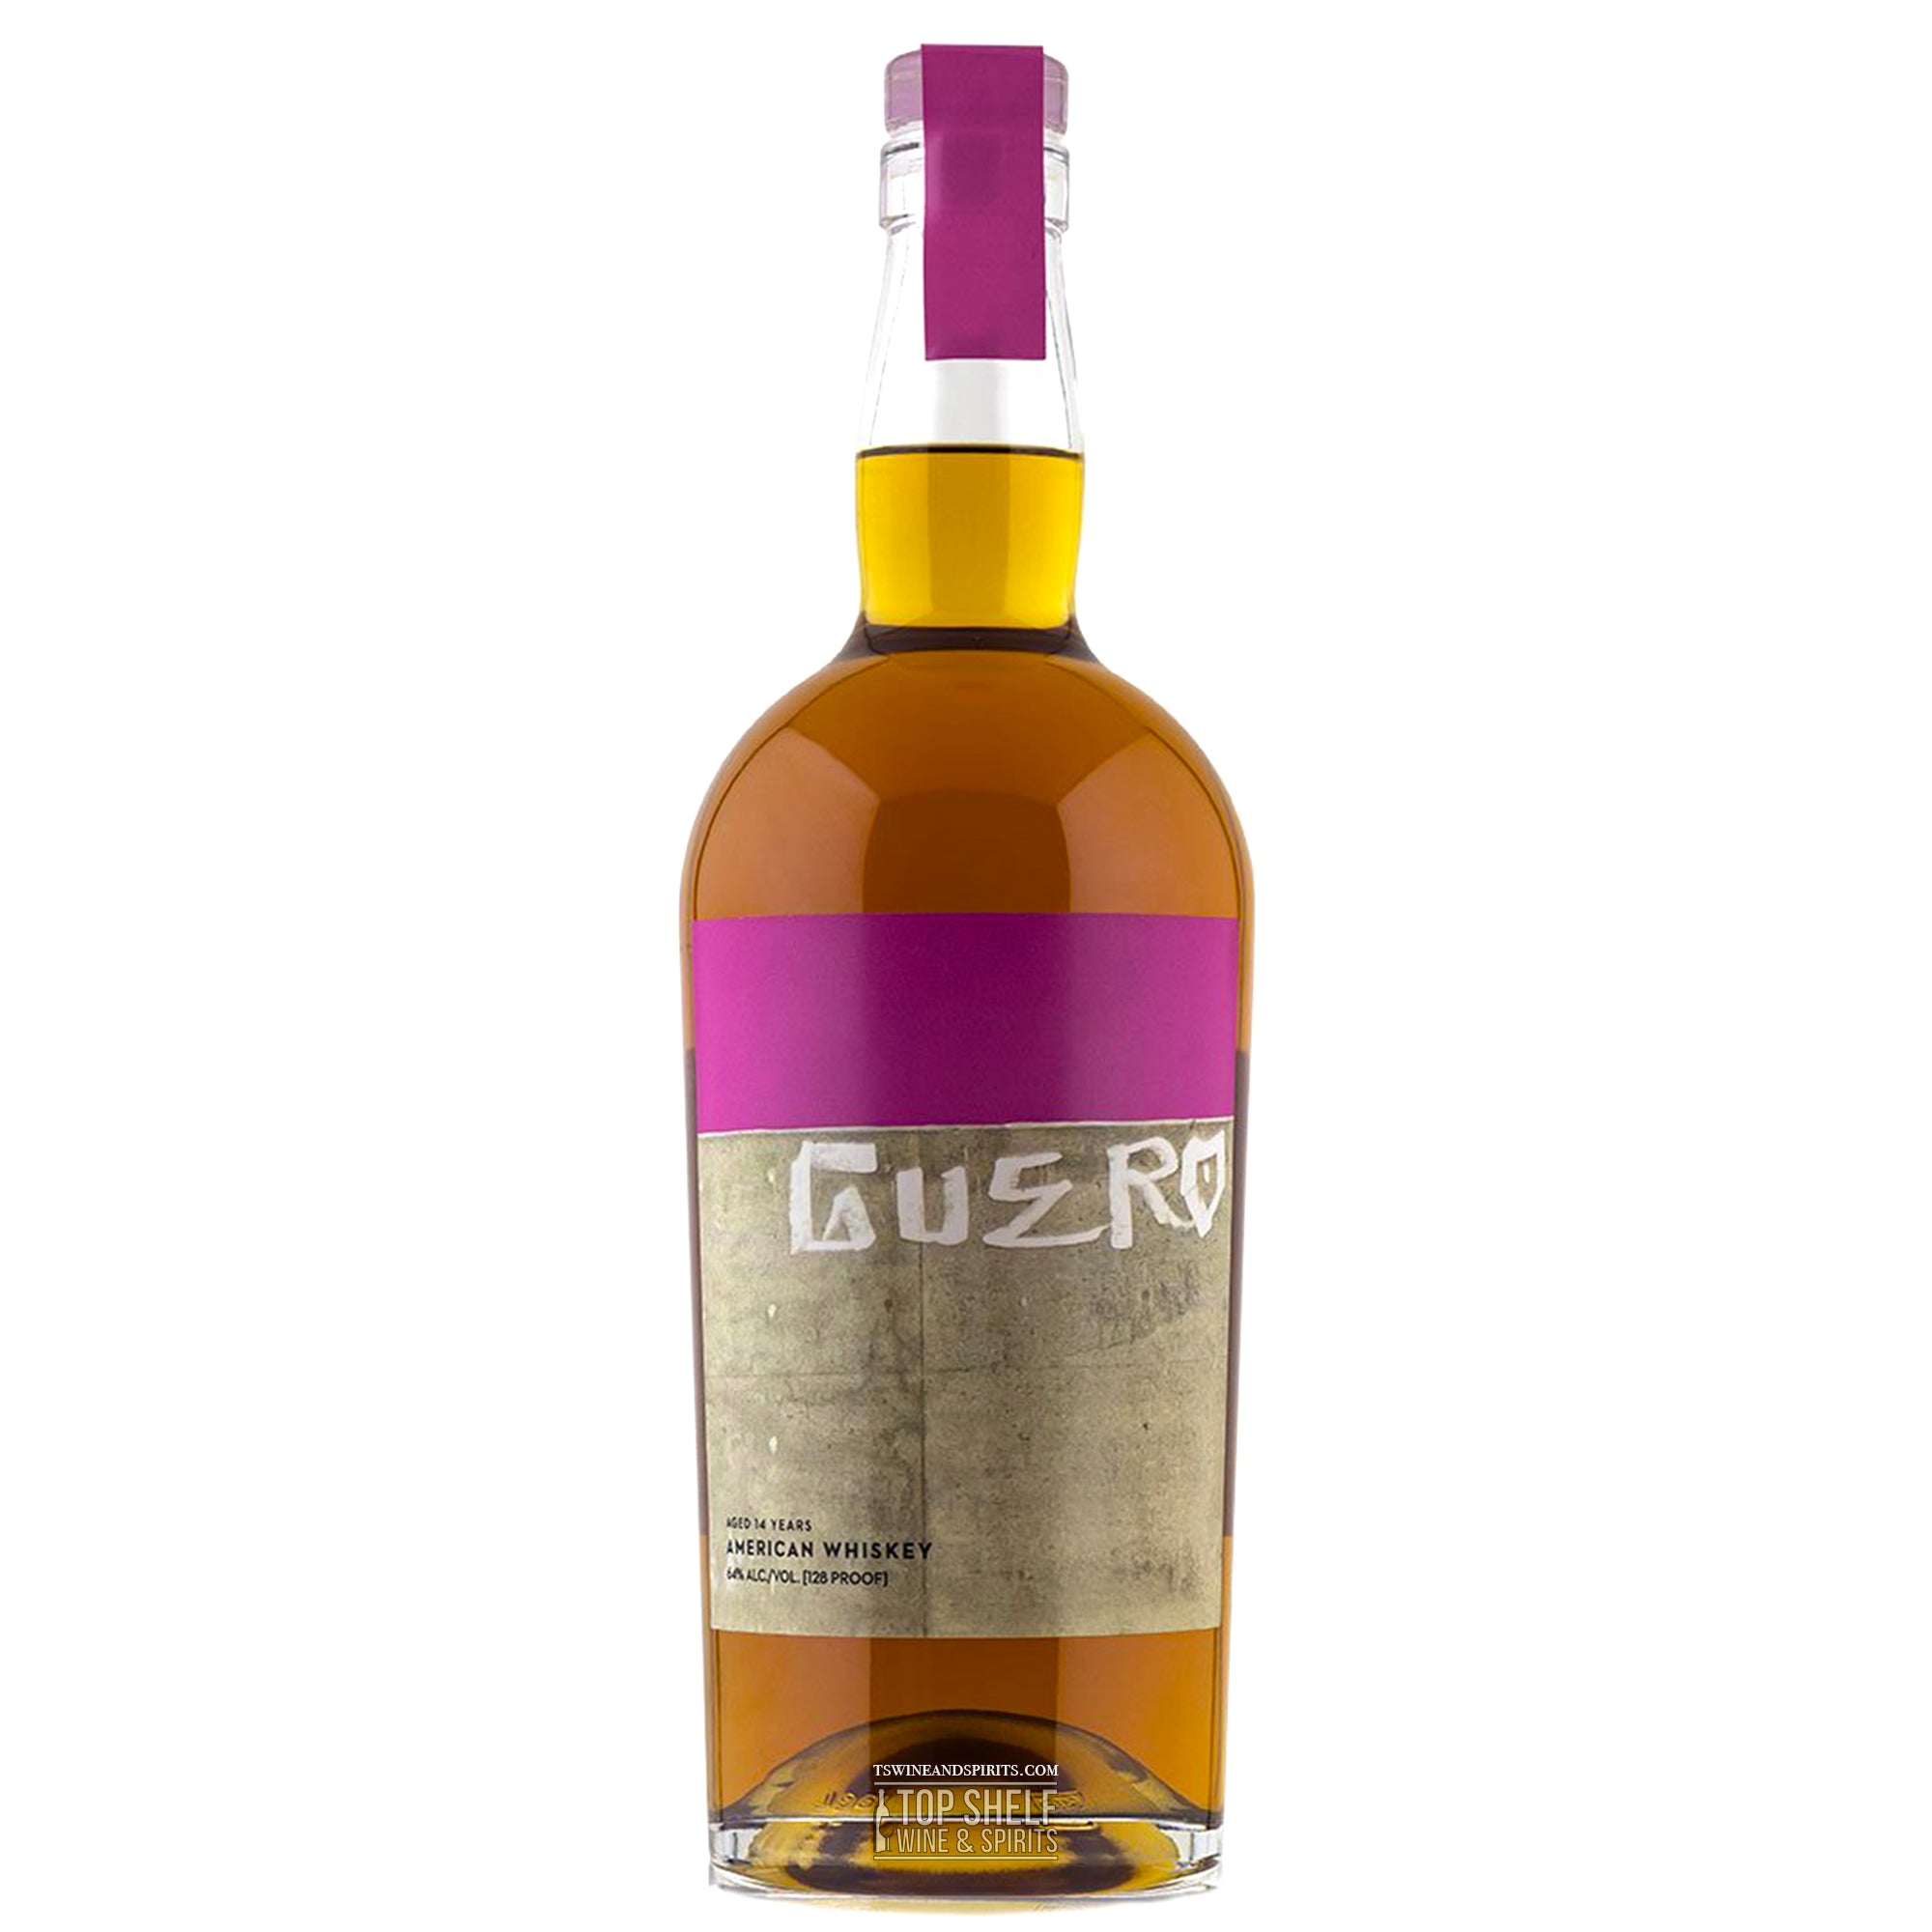 Savage and Cooke Guero 14 Year American Whiskey